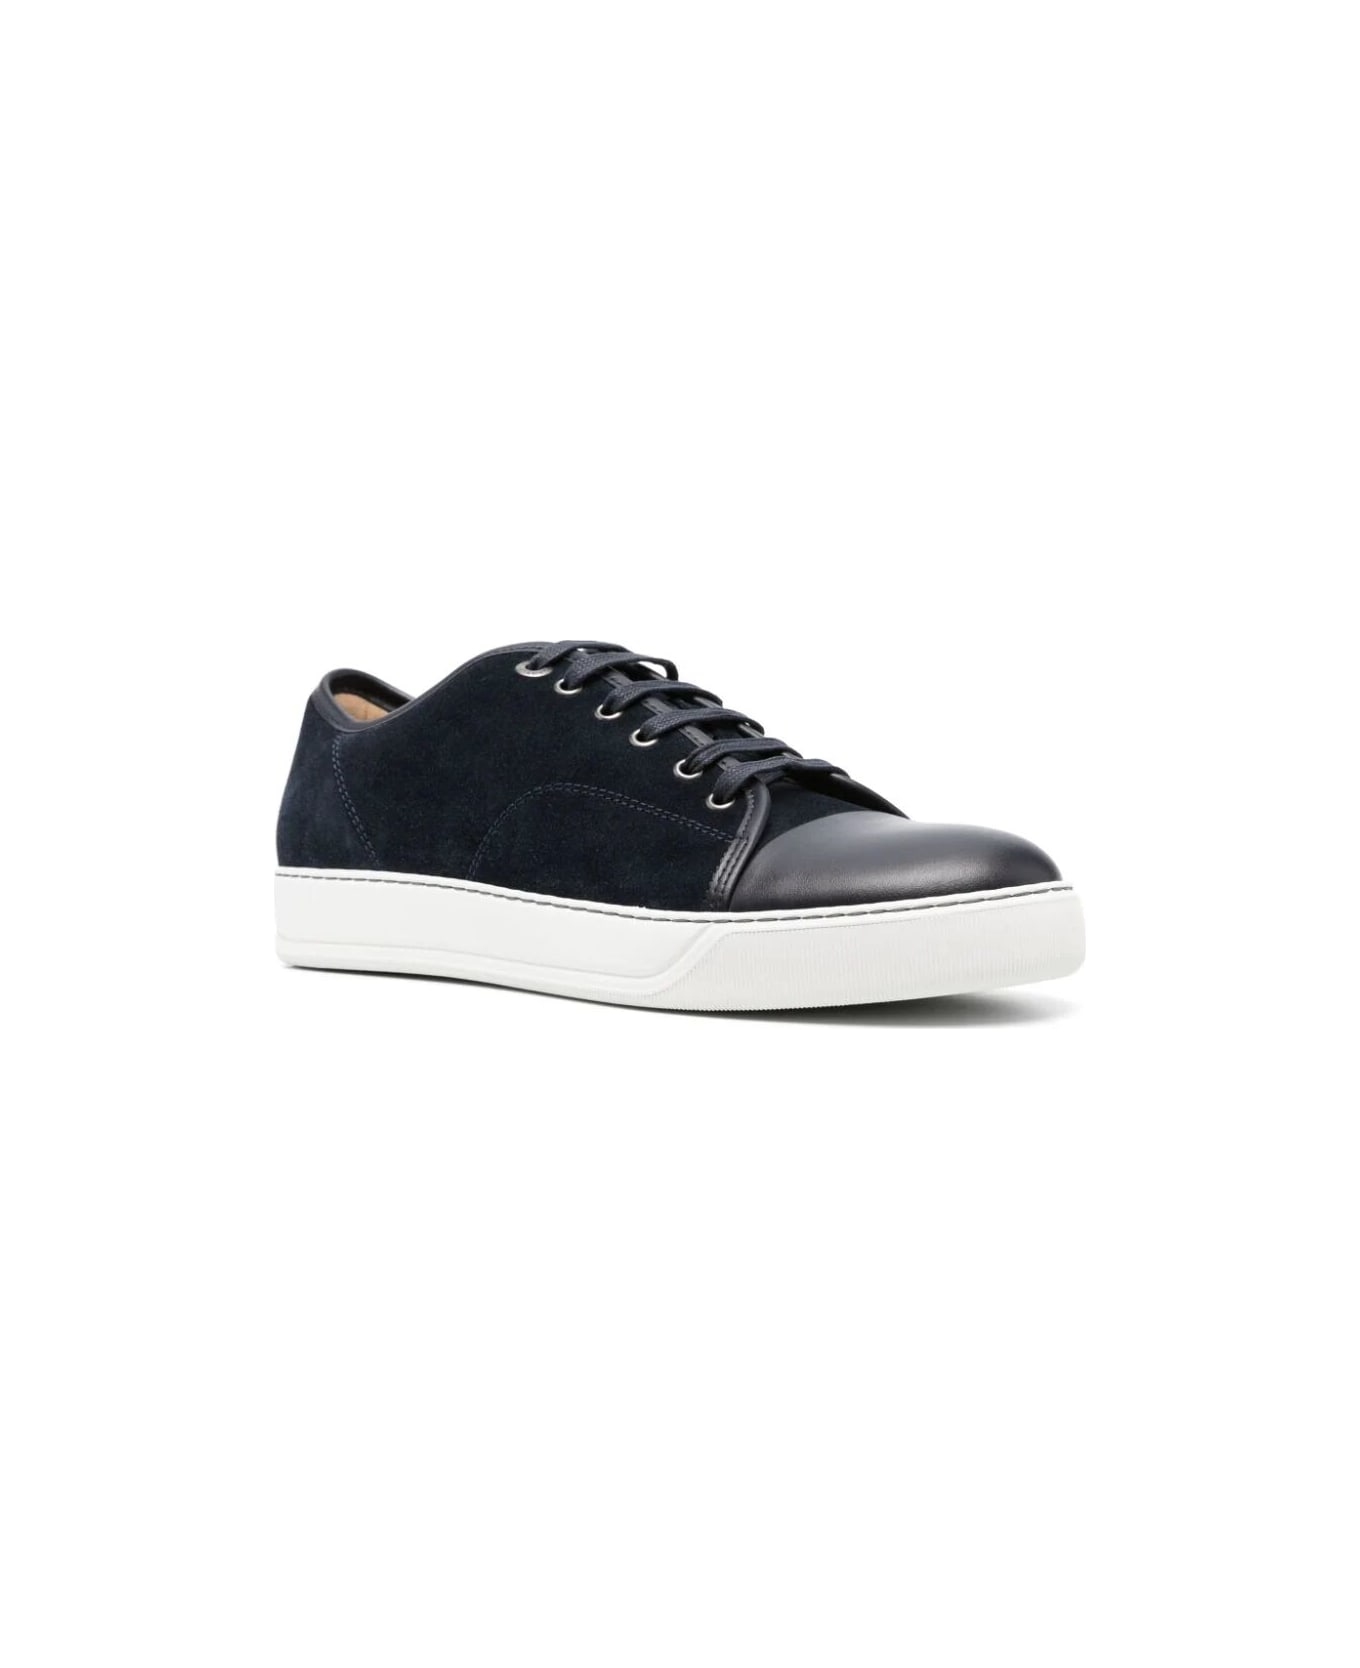 Lanvin Suede And Nappa Captoe Low To Sneaker - Navy Blue